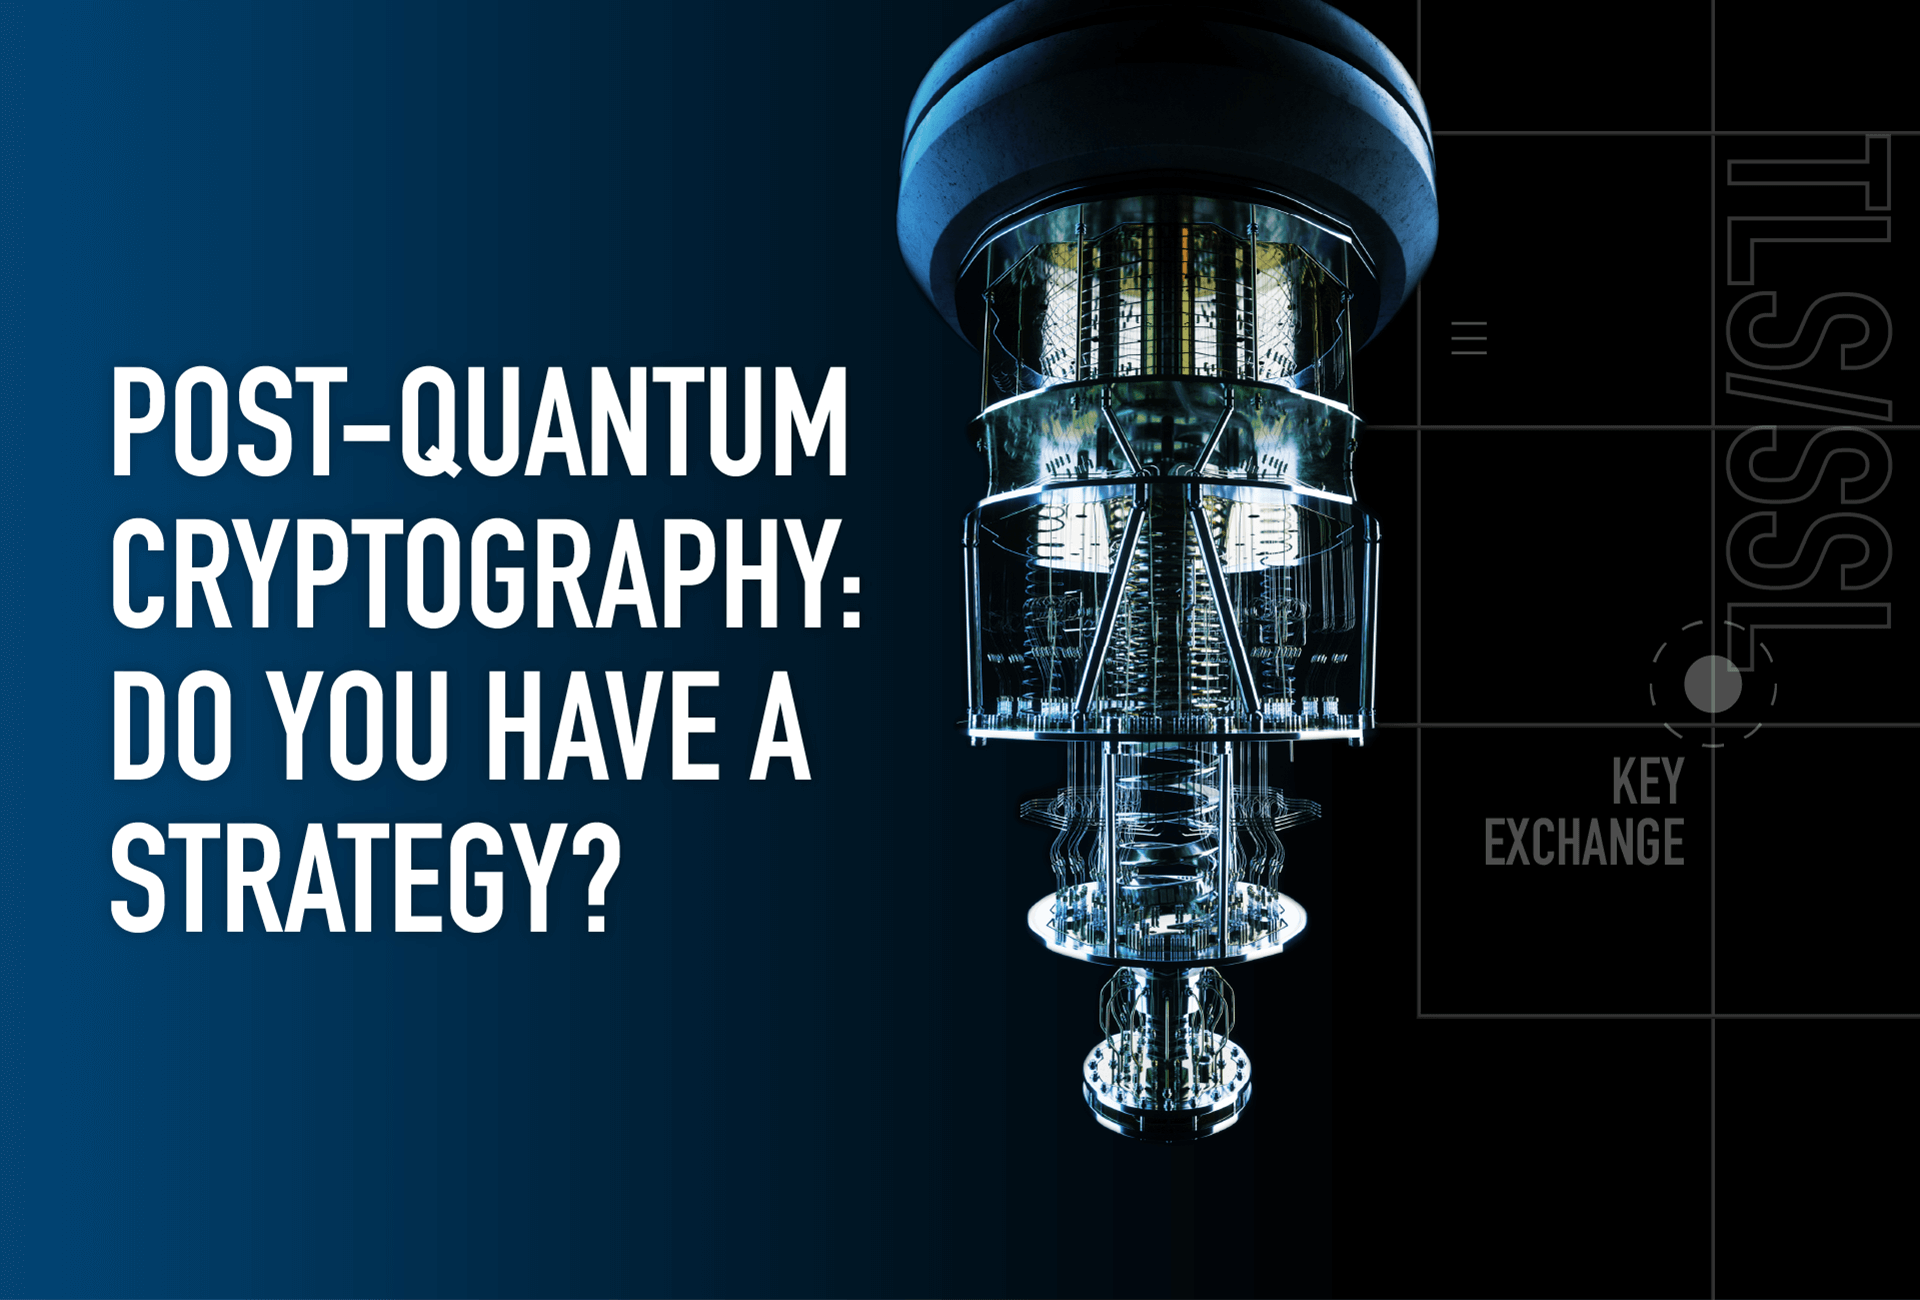 It’s Time to Start Mapping Out Your Post-Quantum Cryptography Transition Strategy 